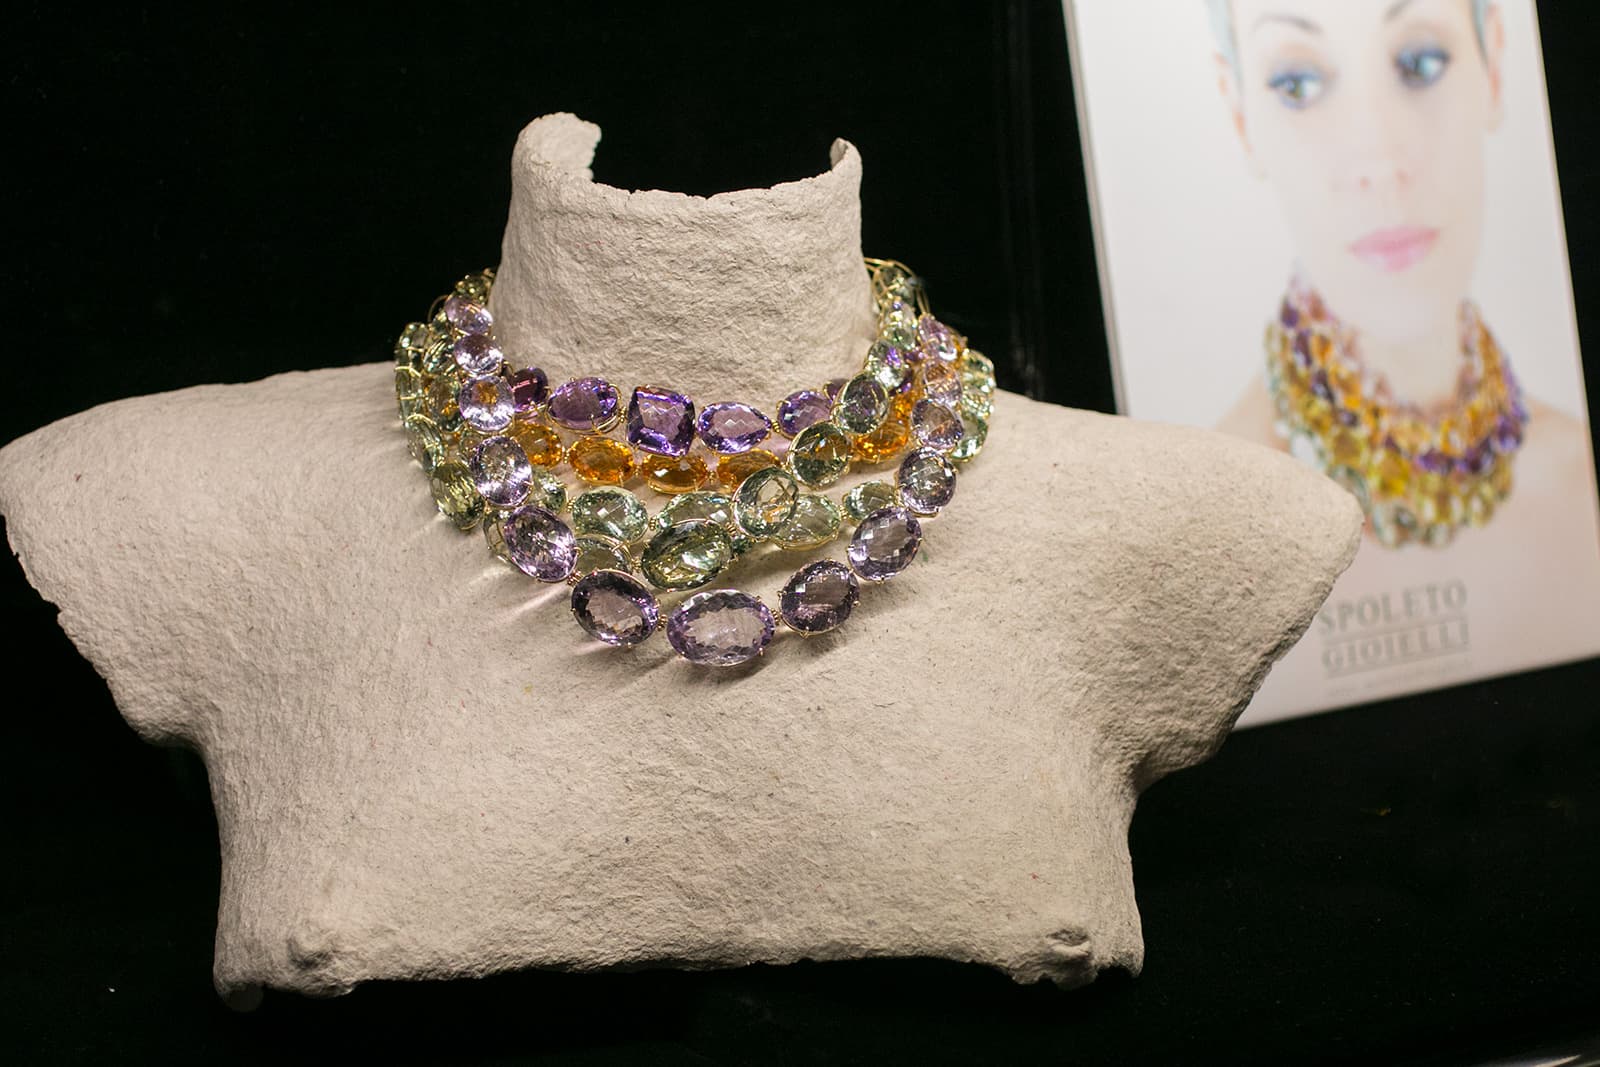 Spoleto Gioielli necklaces with amethysts, prasiolites and citrines in yellow gold